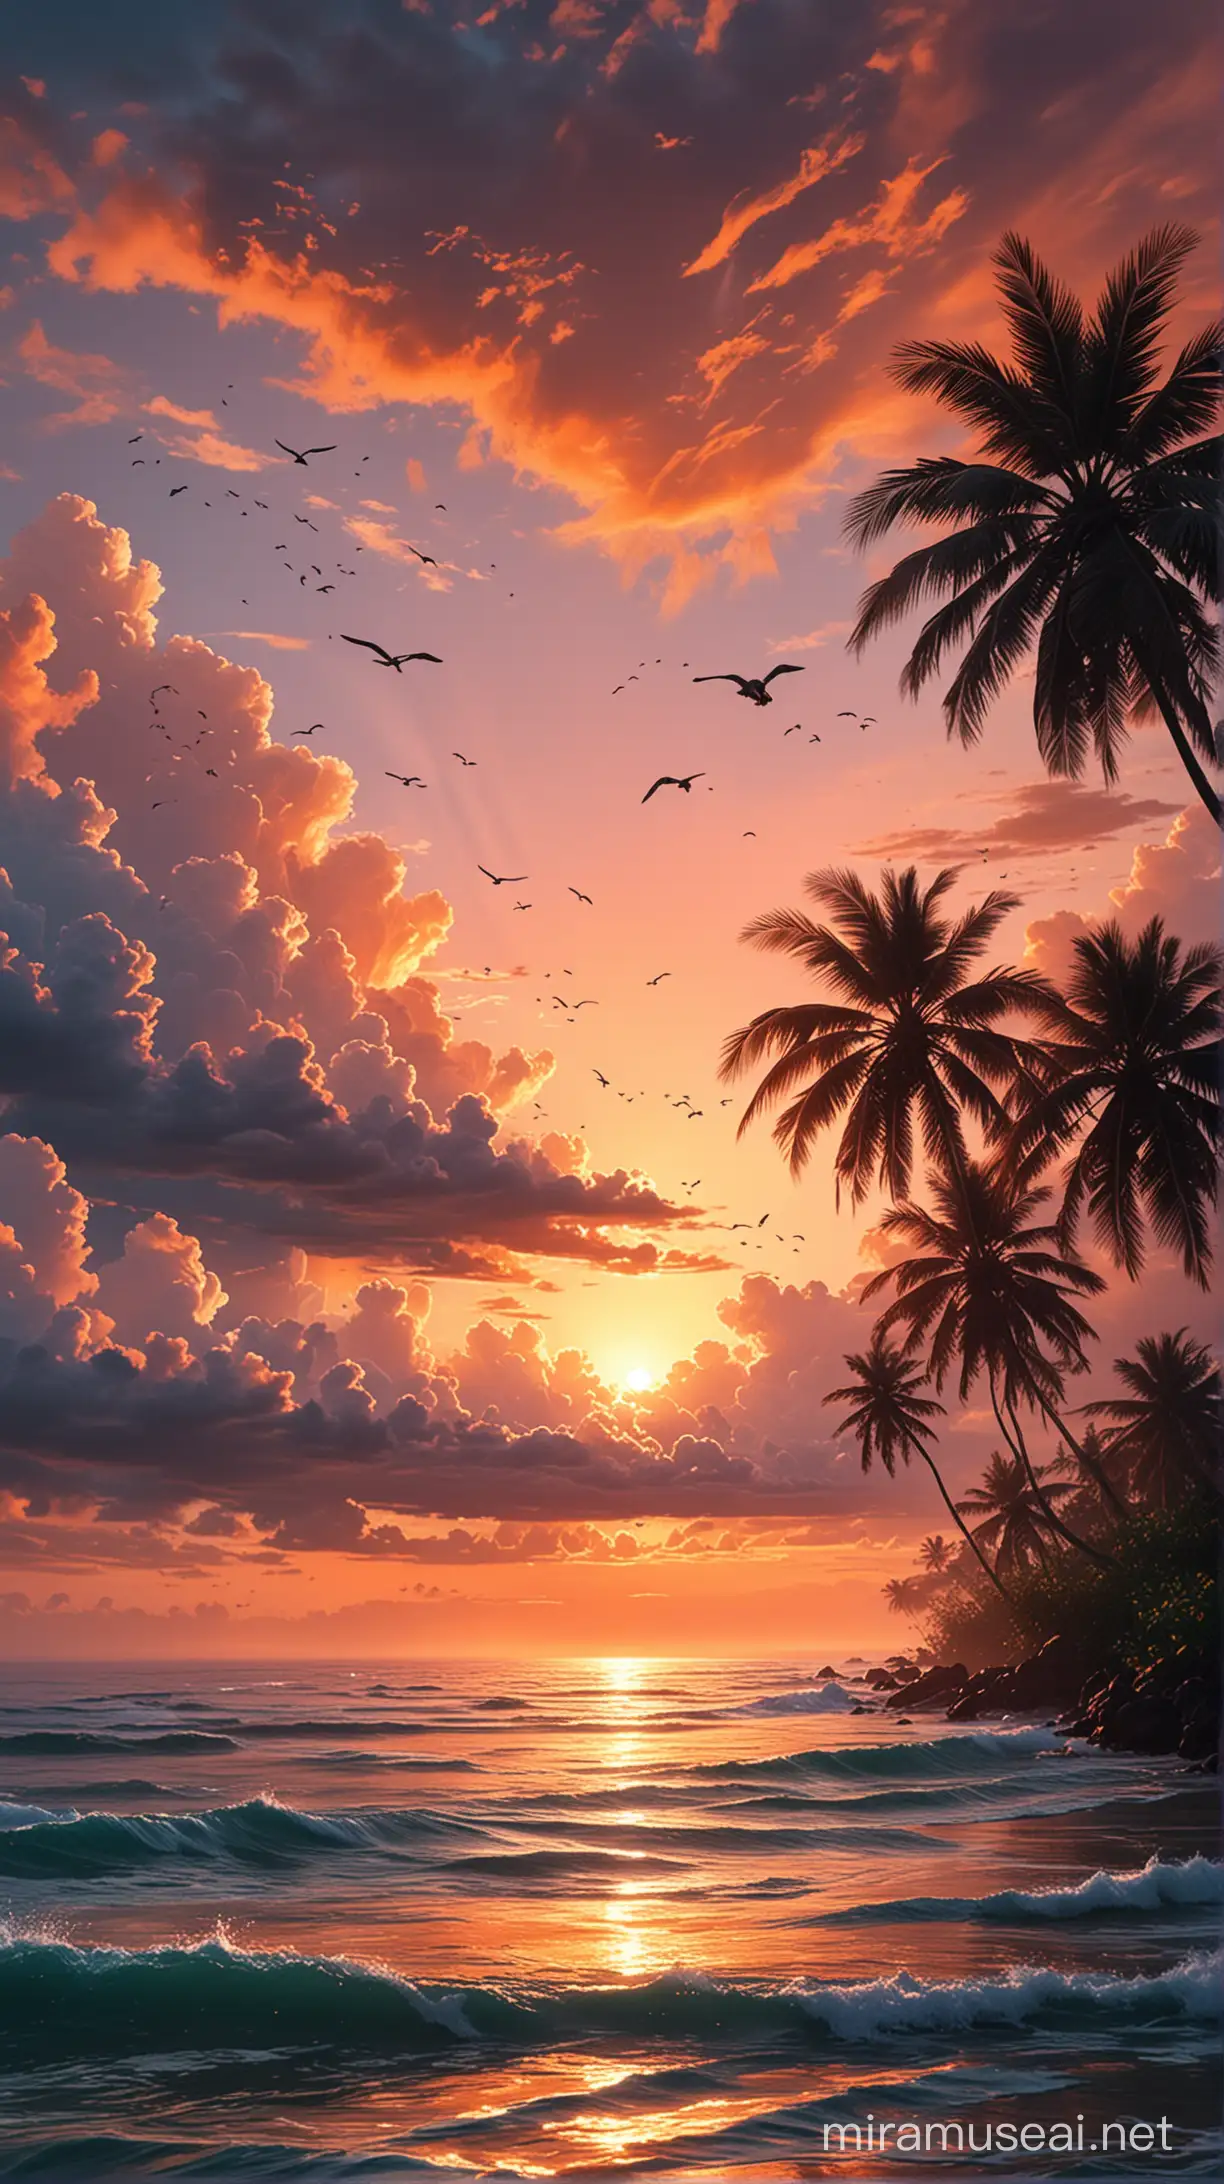 Tranquil Tropical Sunset with Palm Trees and Gliding Birds